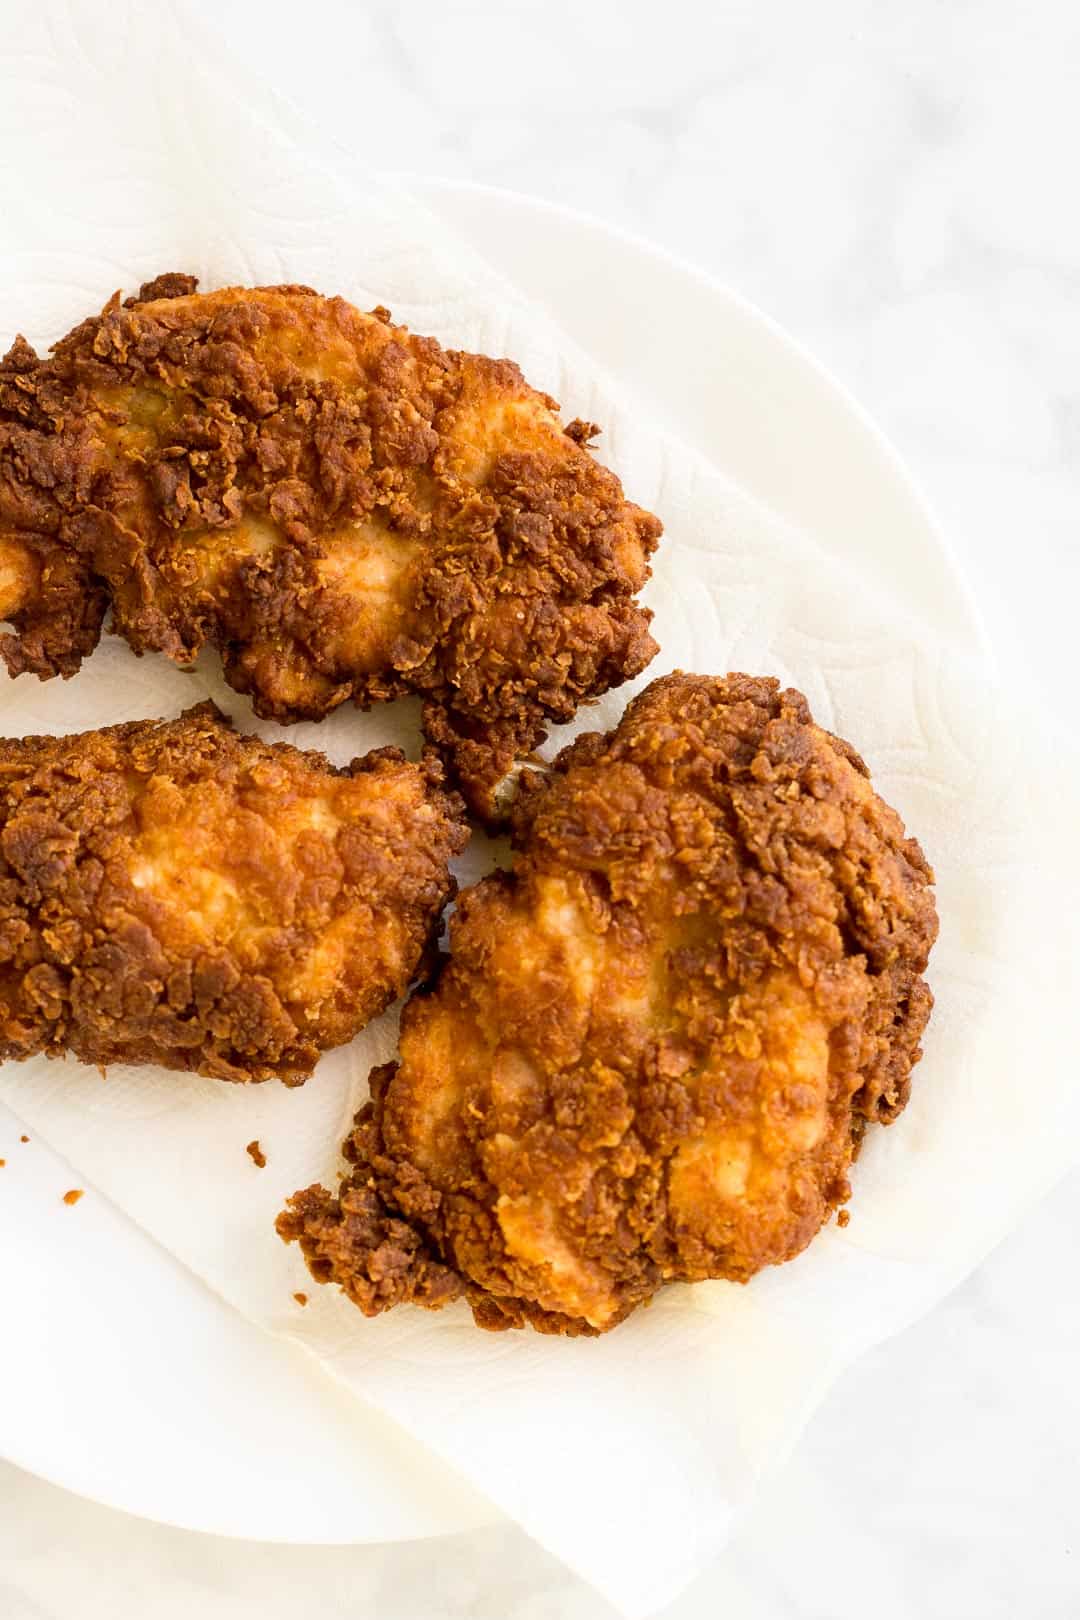 Fried breaded chicken draining on a plate